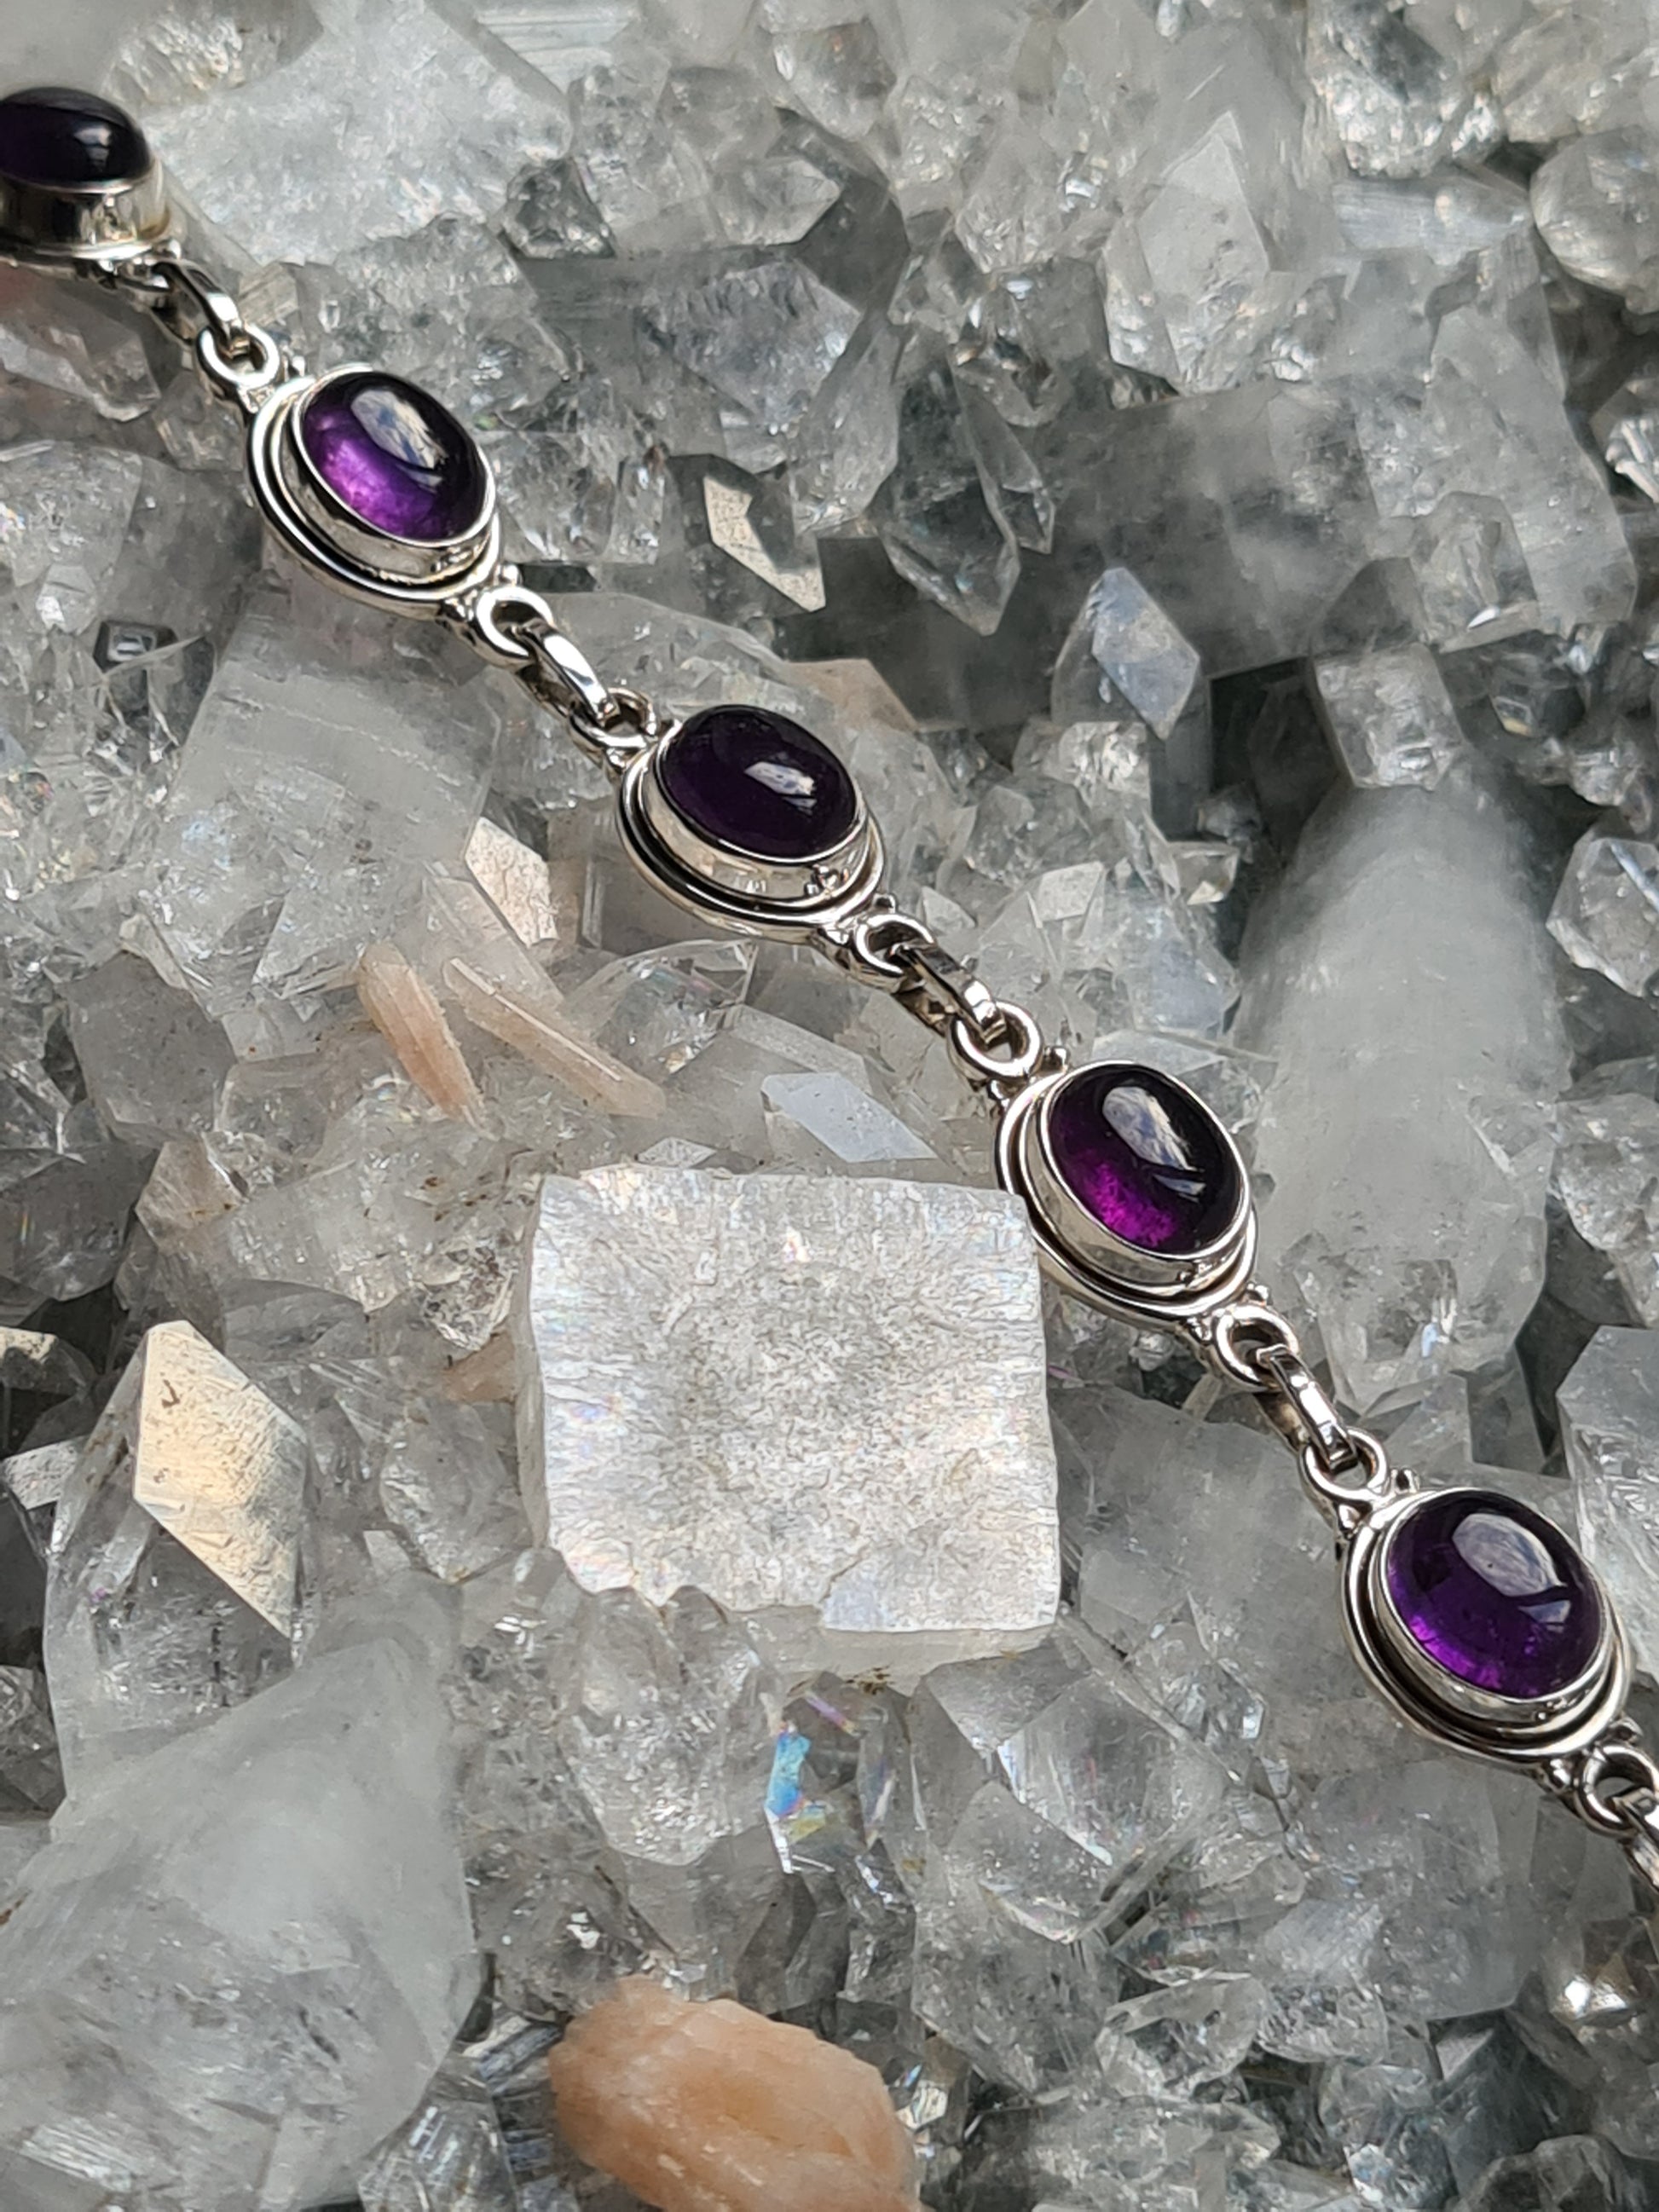 A Sterling Silver Bracelet, rubover set with oval cabochon amethyst gemstones (7 in total). Lobster clasp. Measures from 19cm to 20.8cm in length